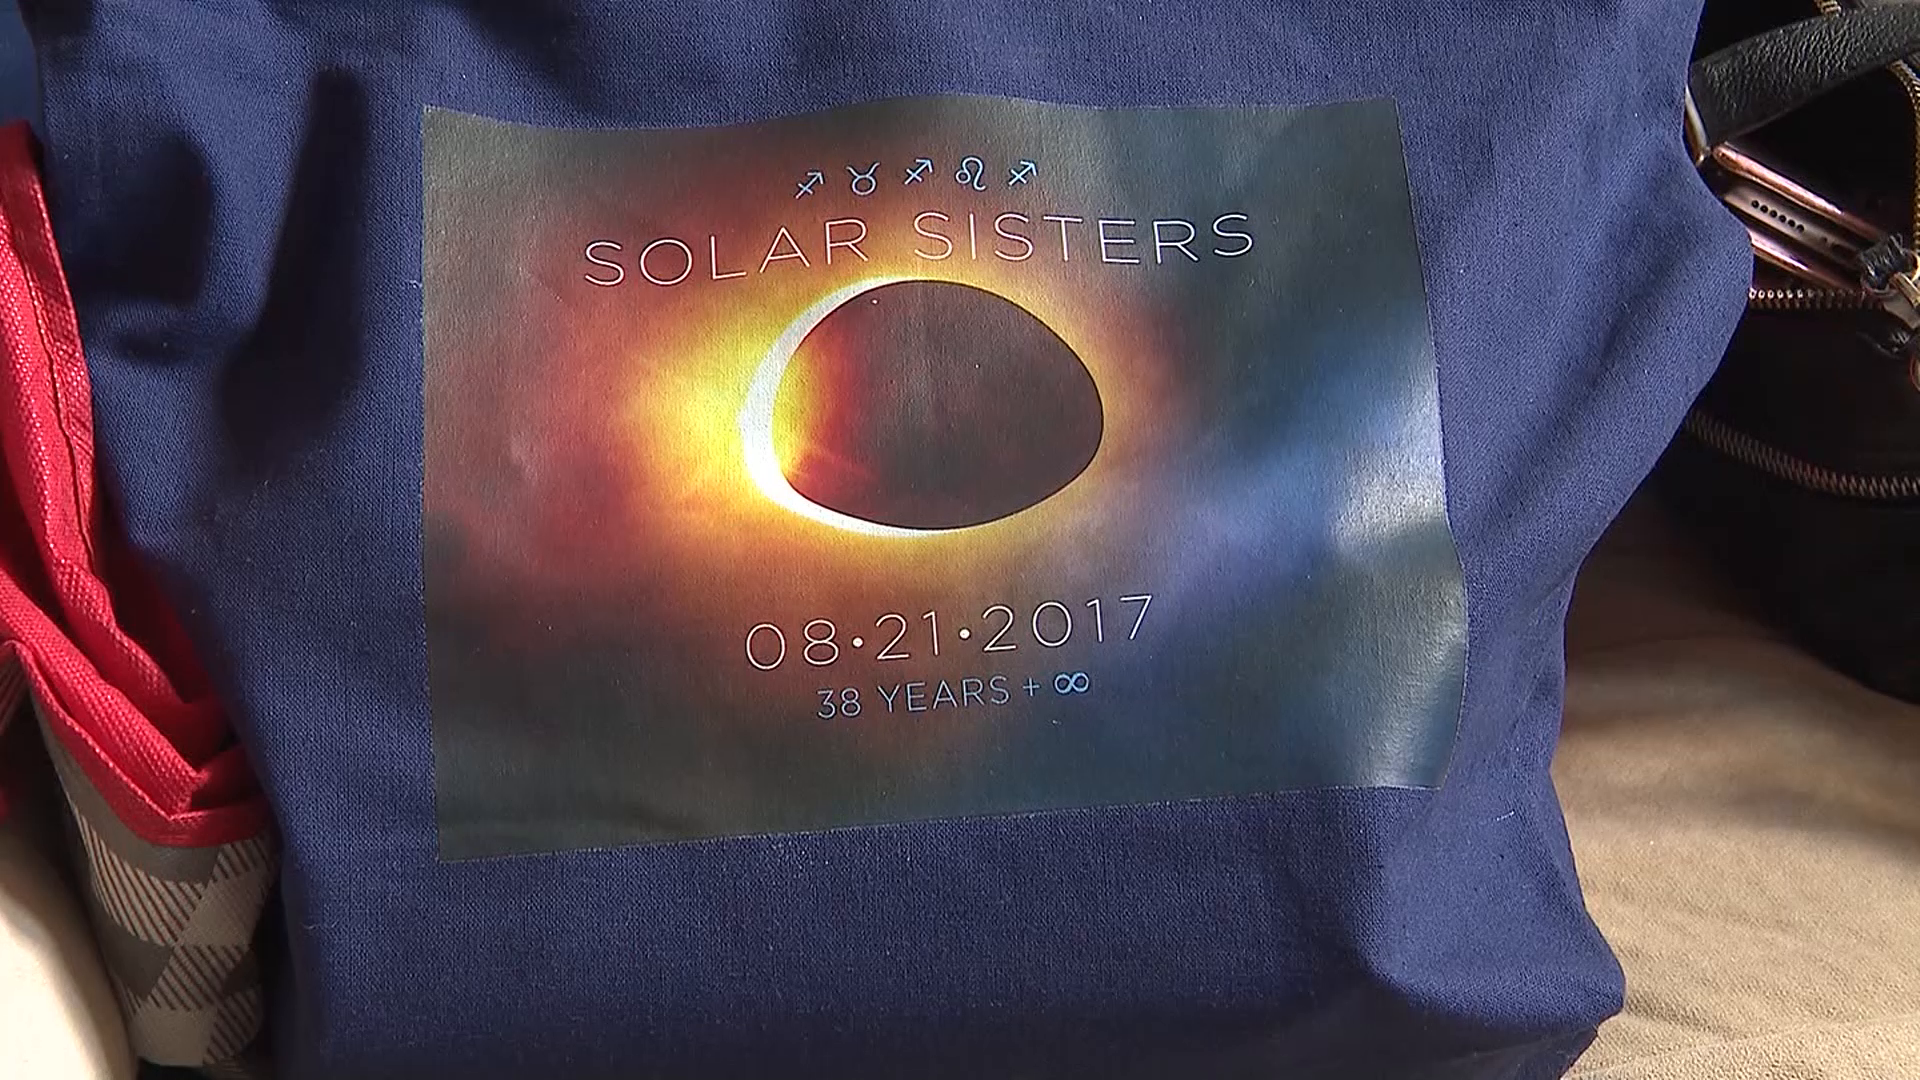 ‘Solar sisters’ keep nearly 40-year-old promise to watch eclipse together